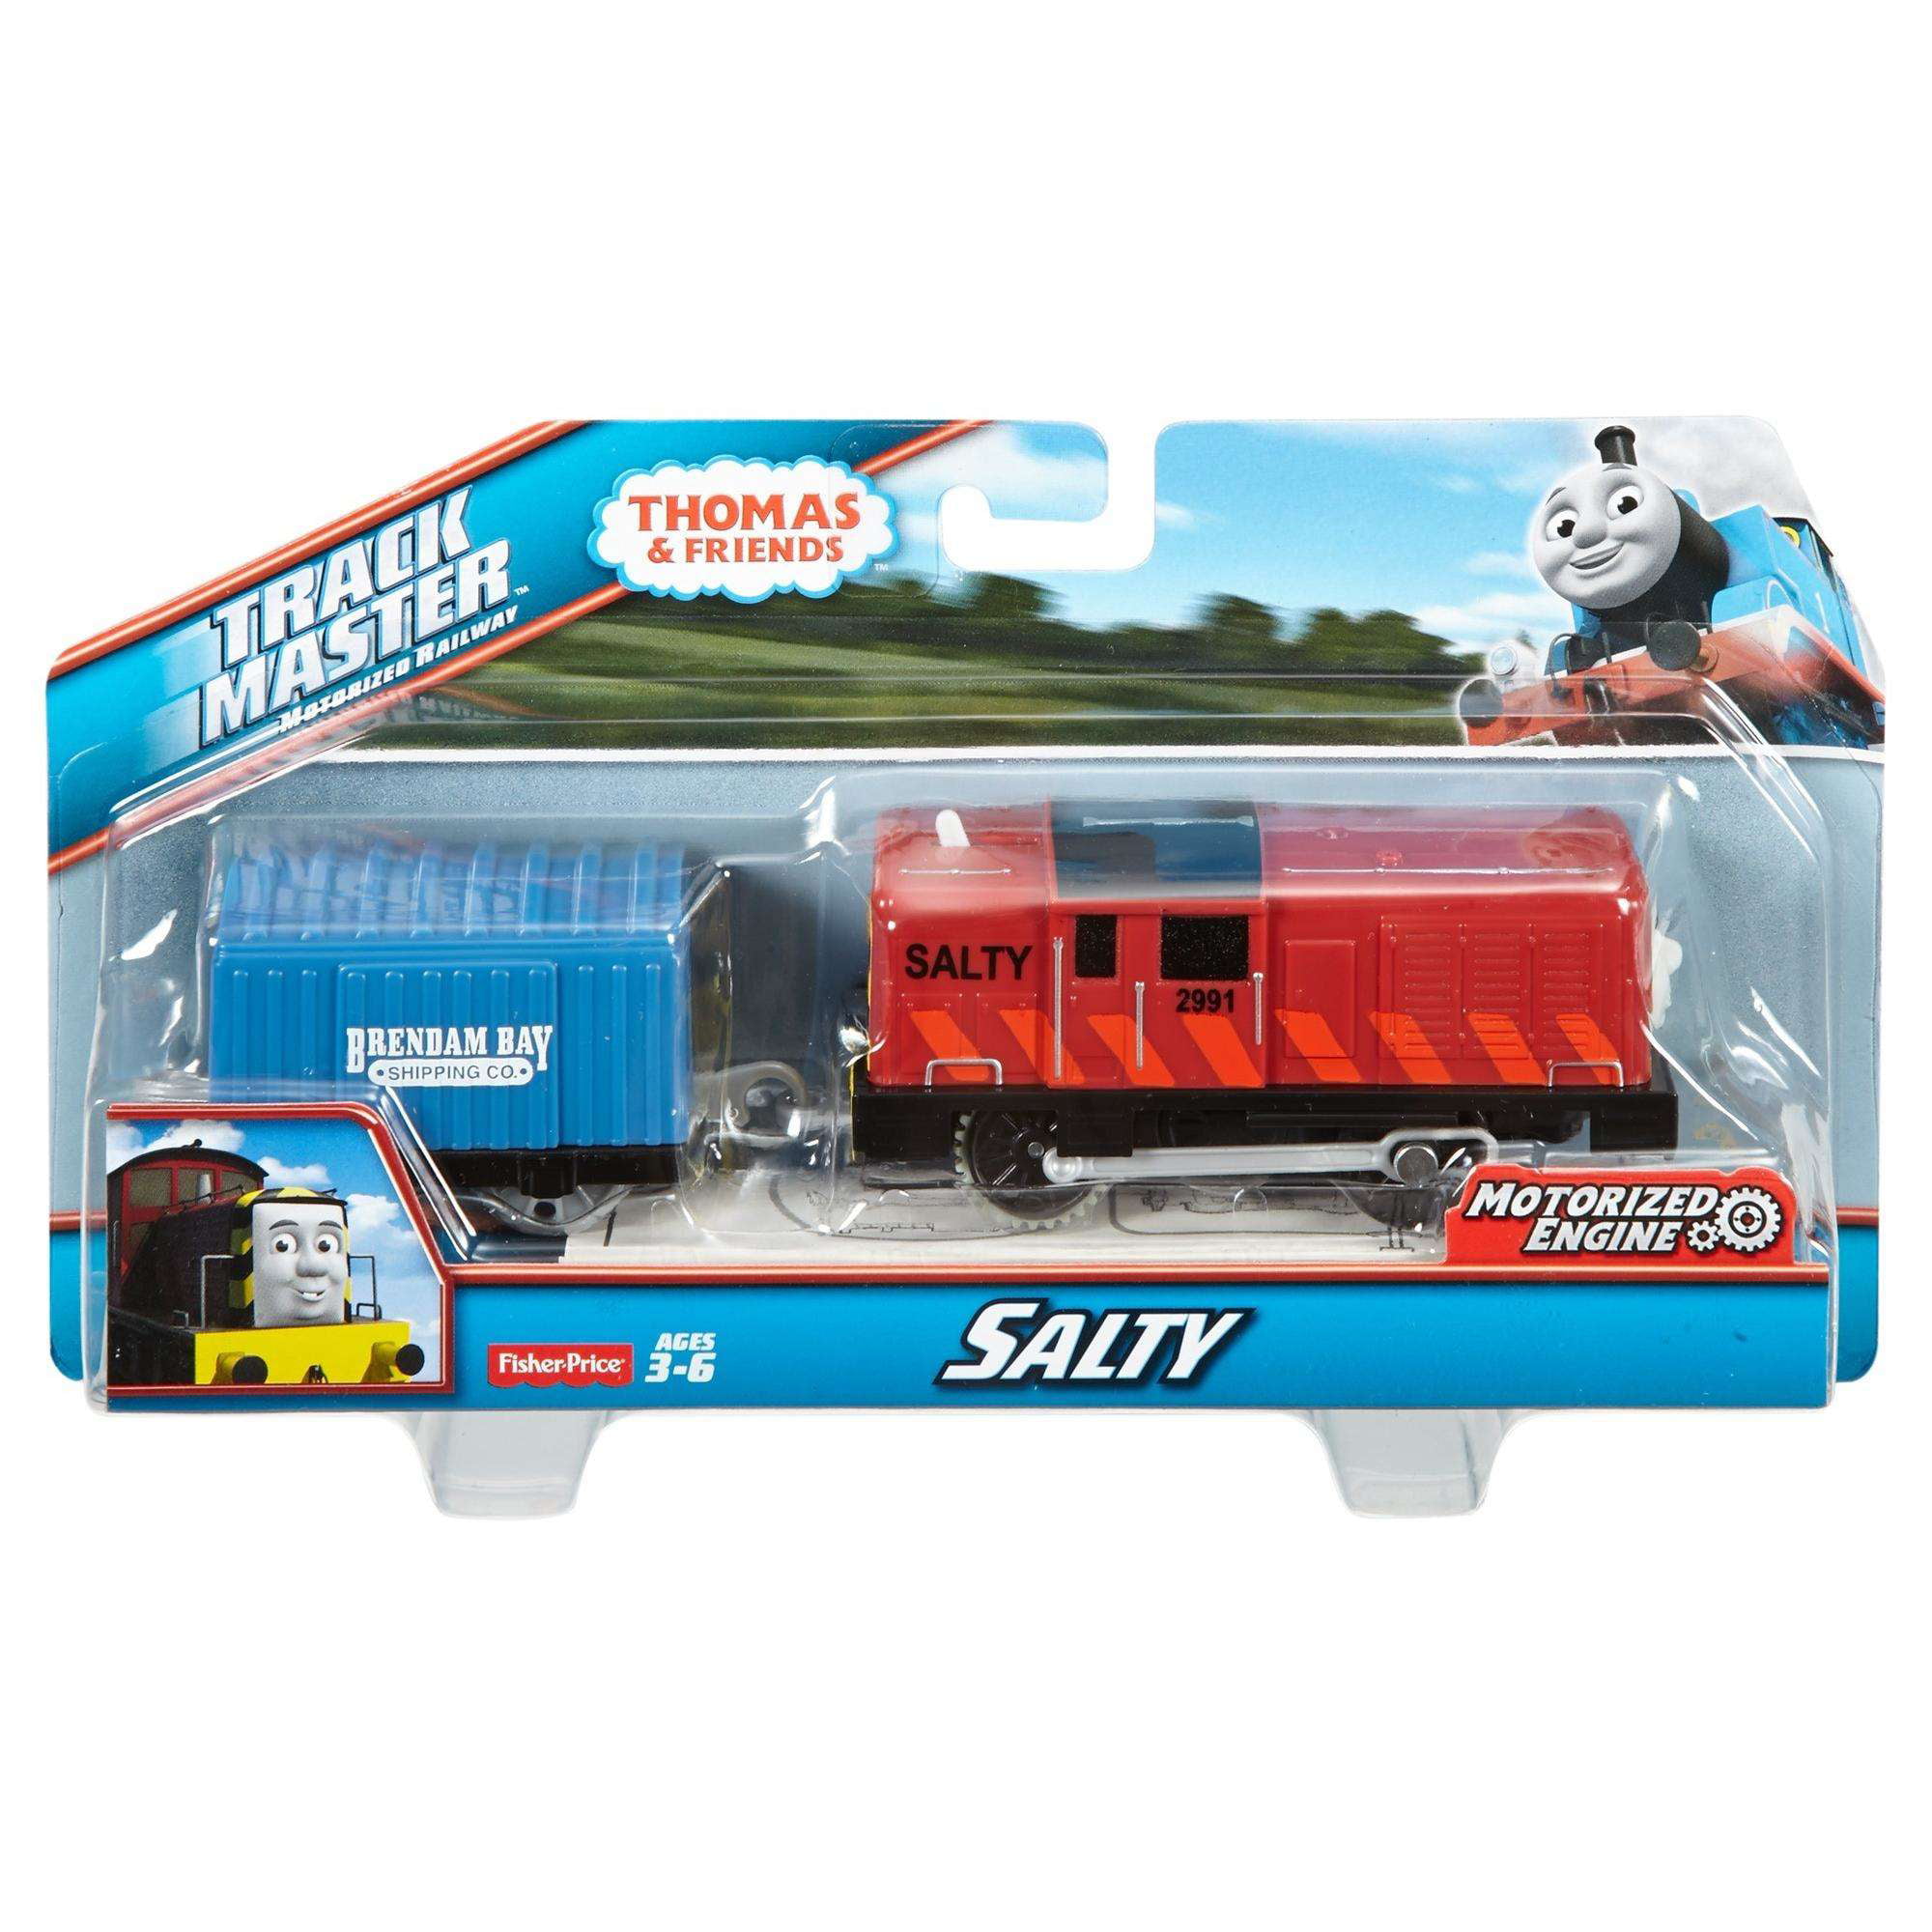 Details about   Thomas & Friends Track Master Salty Motorized Engine BNIP Free Shipping